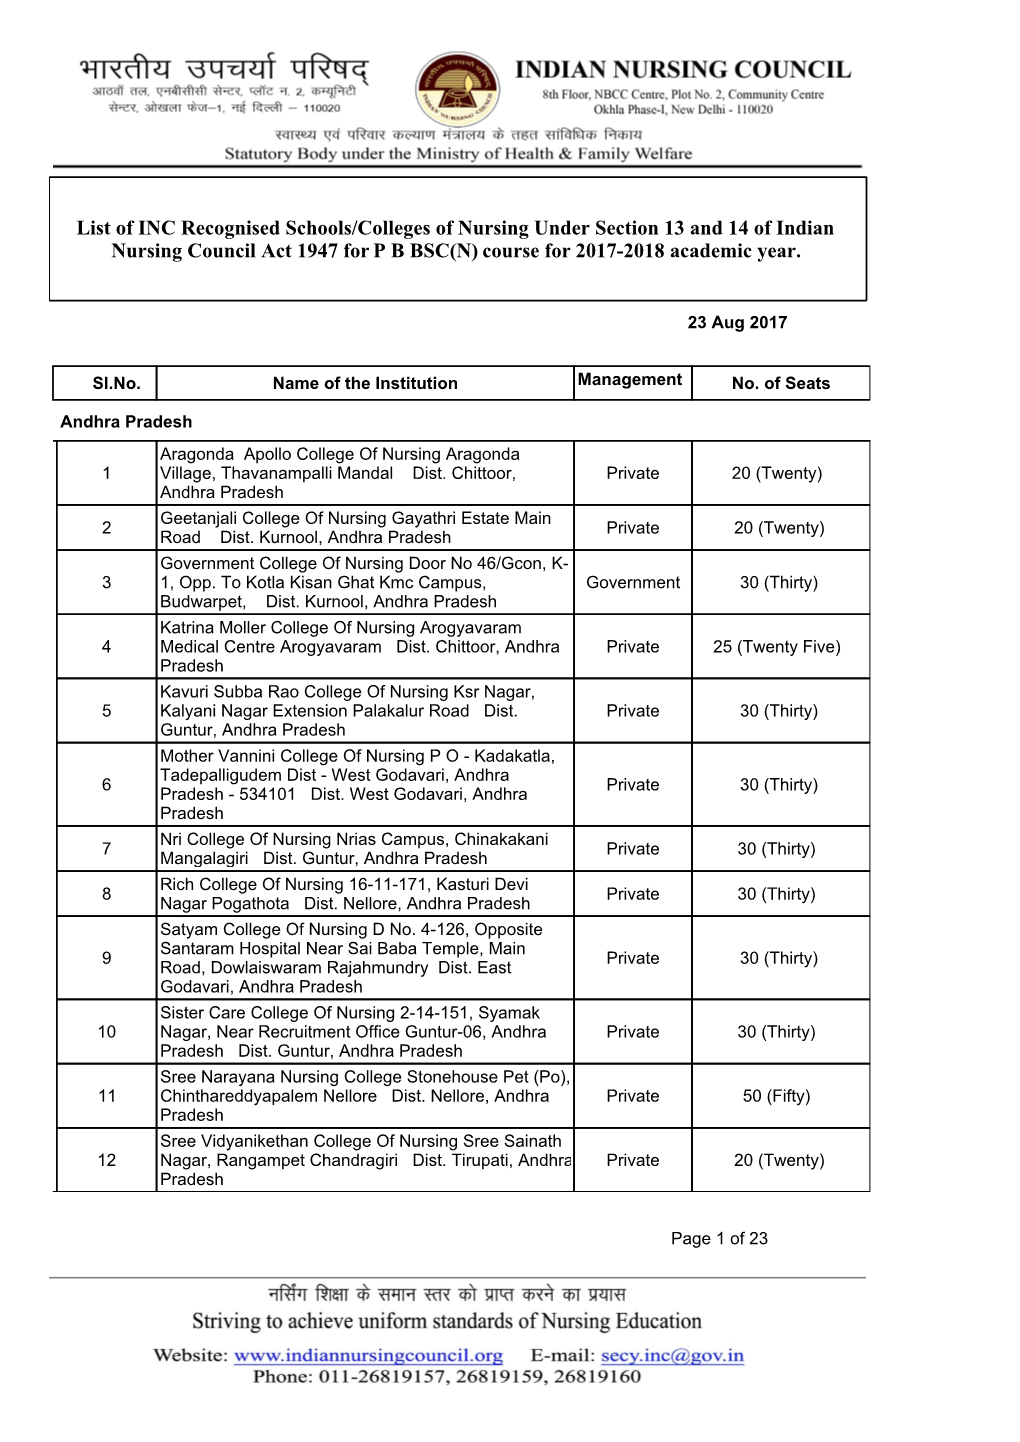 List of INC Recognised Schools/Colleges of Nursing Under Section 13 and 14 of Indian Nursing Council Act 1947 for P B BSC(N) Course for 2017-2018 Academic Year